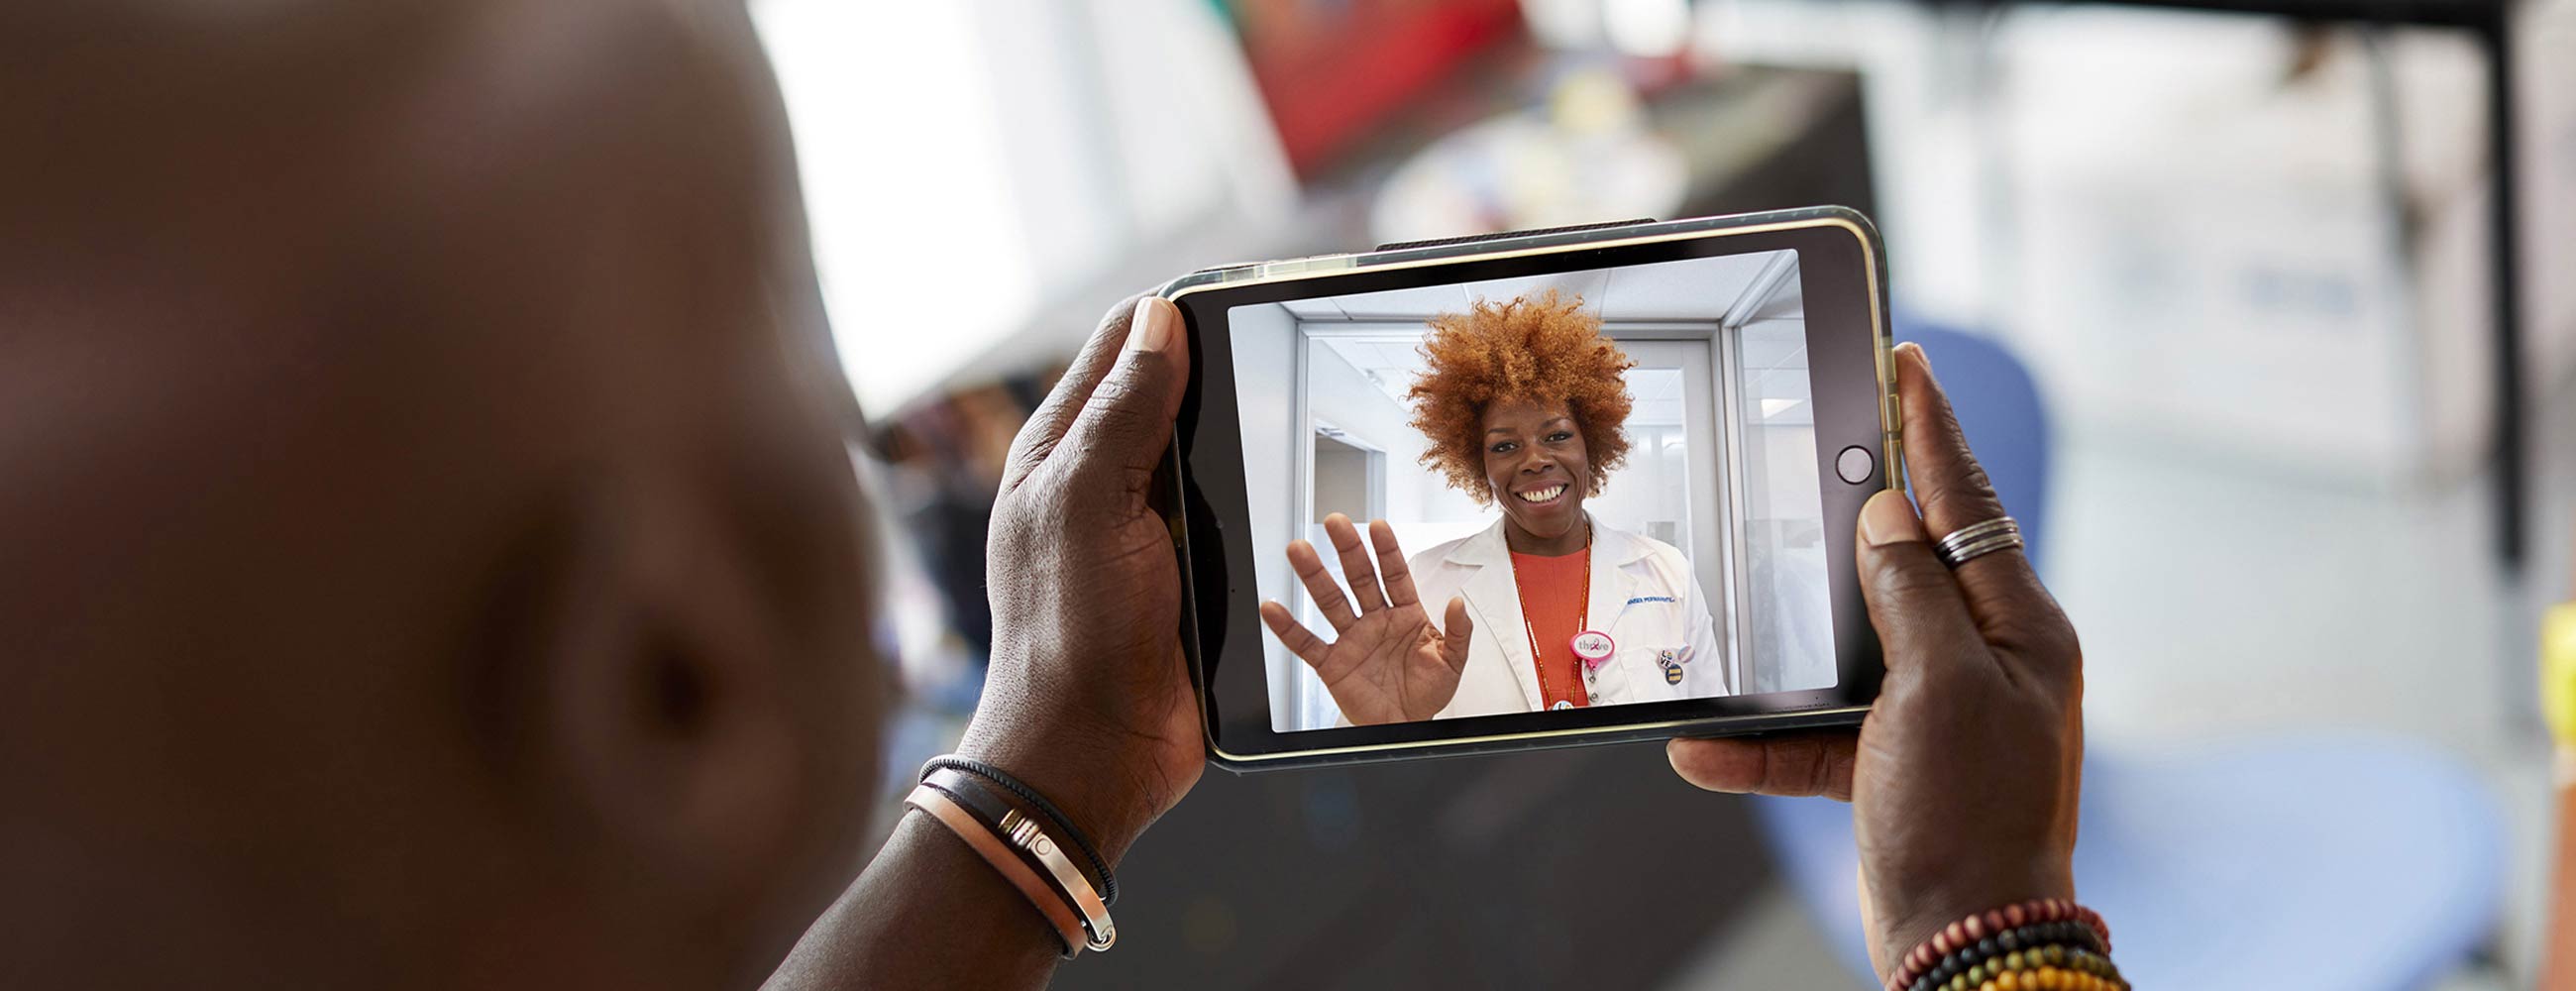 A smiling female physician waving while her patient holds a tablet during a telehealth visit.